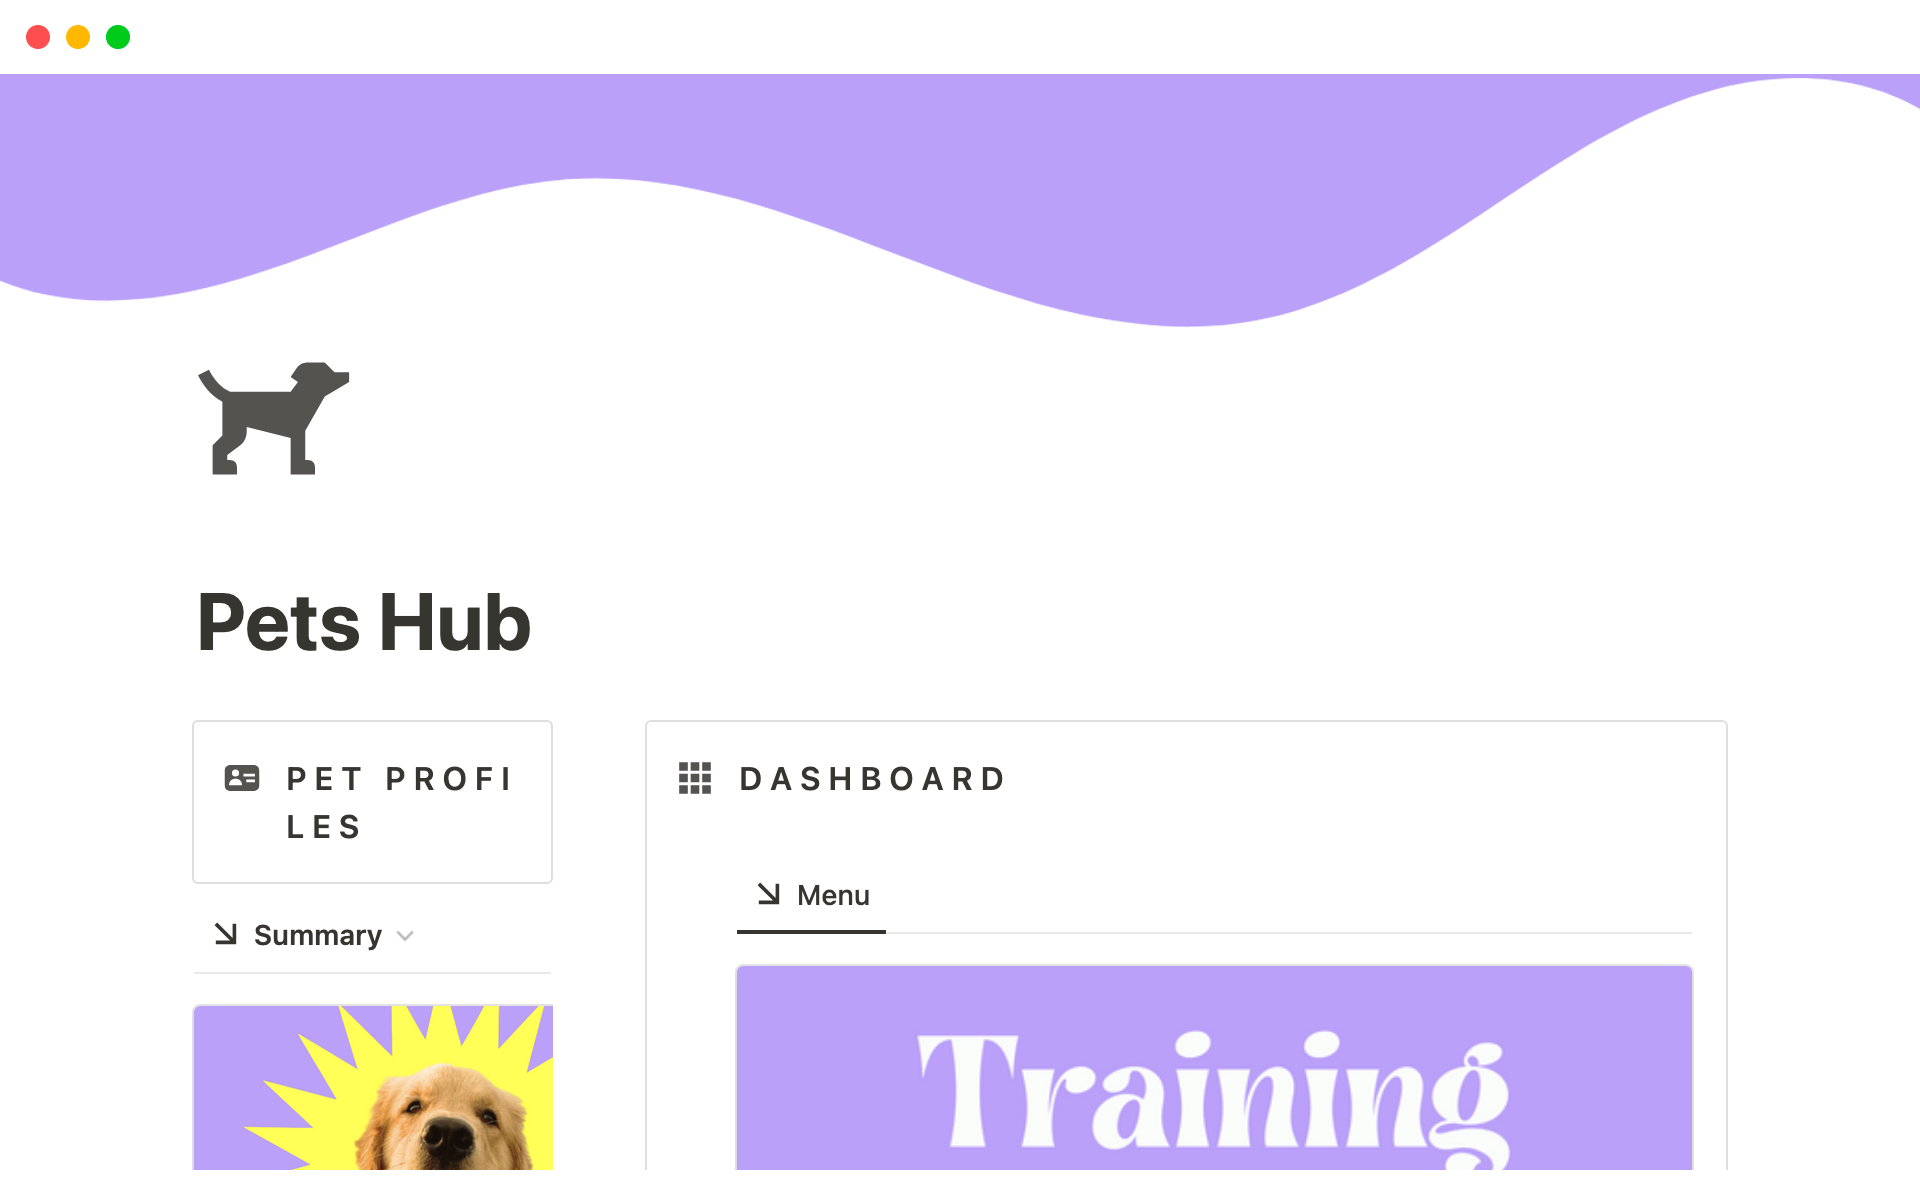 The Pet Hub covers all parts of pet ownership - health, training, grooming, travel planning, finances, pet sitting, keeping track of all kinds of things, and more.